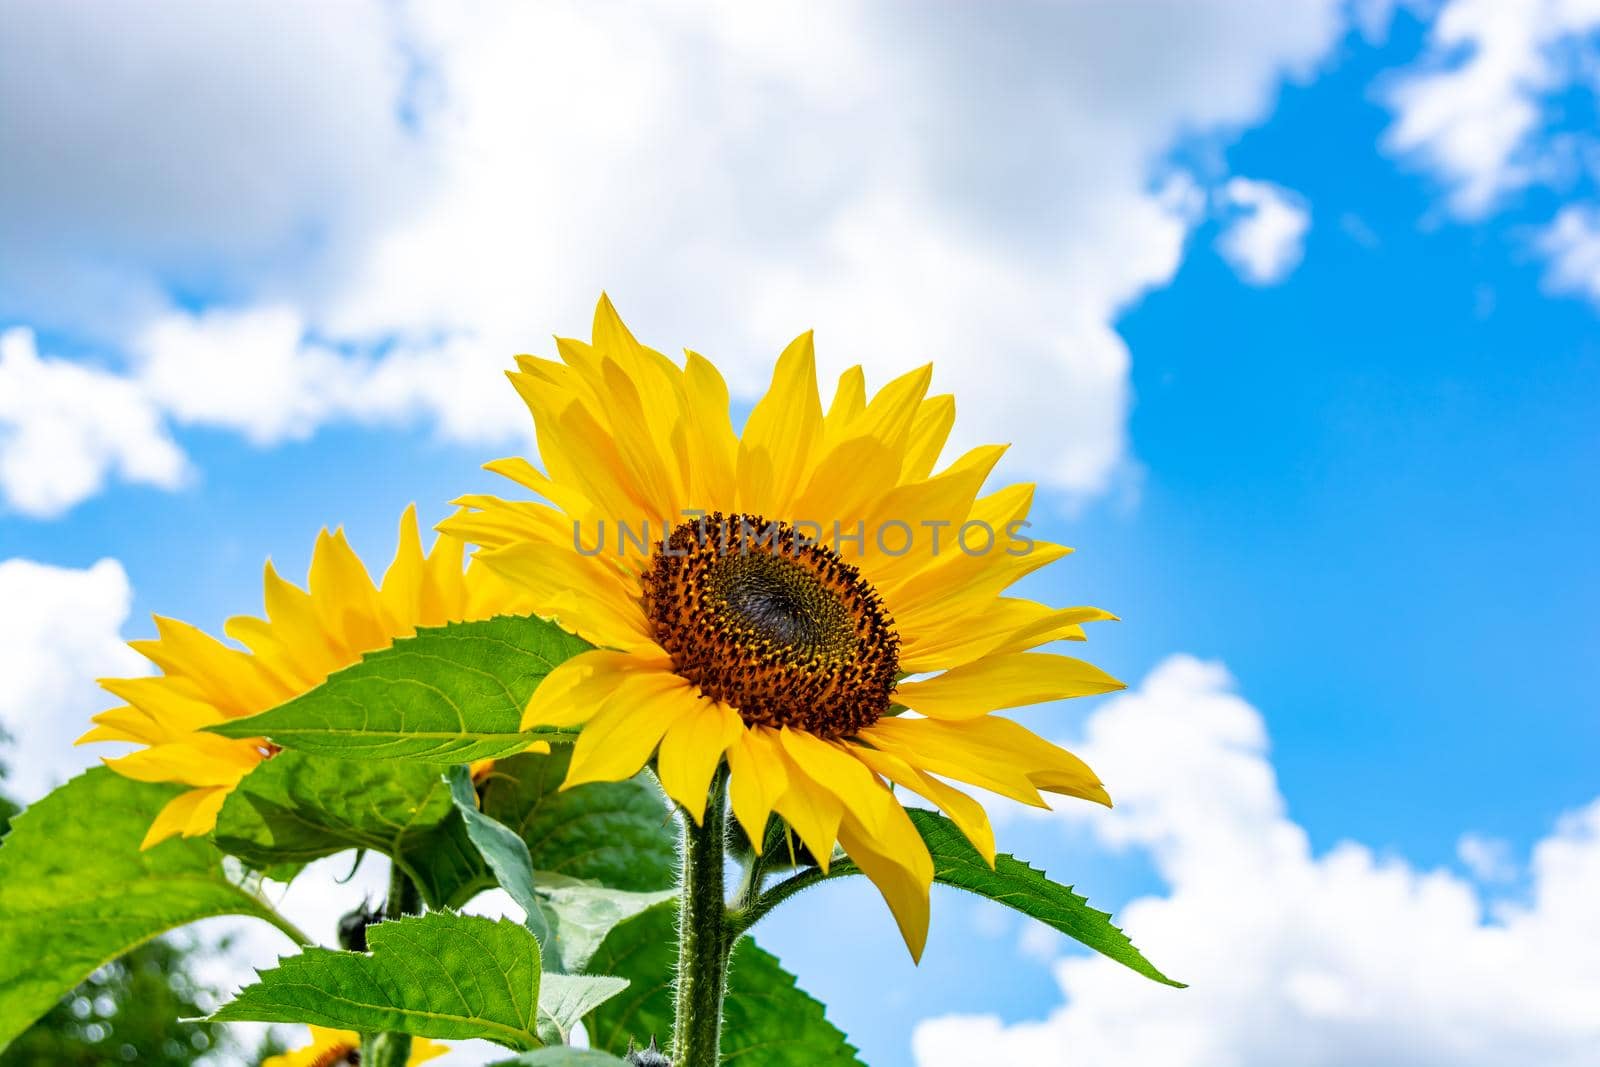 Yellow sunflower against the blue sky and white clouds in good weather.